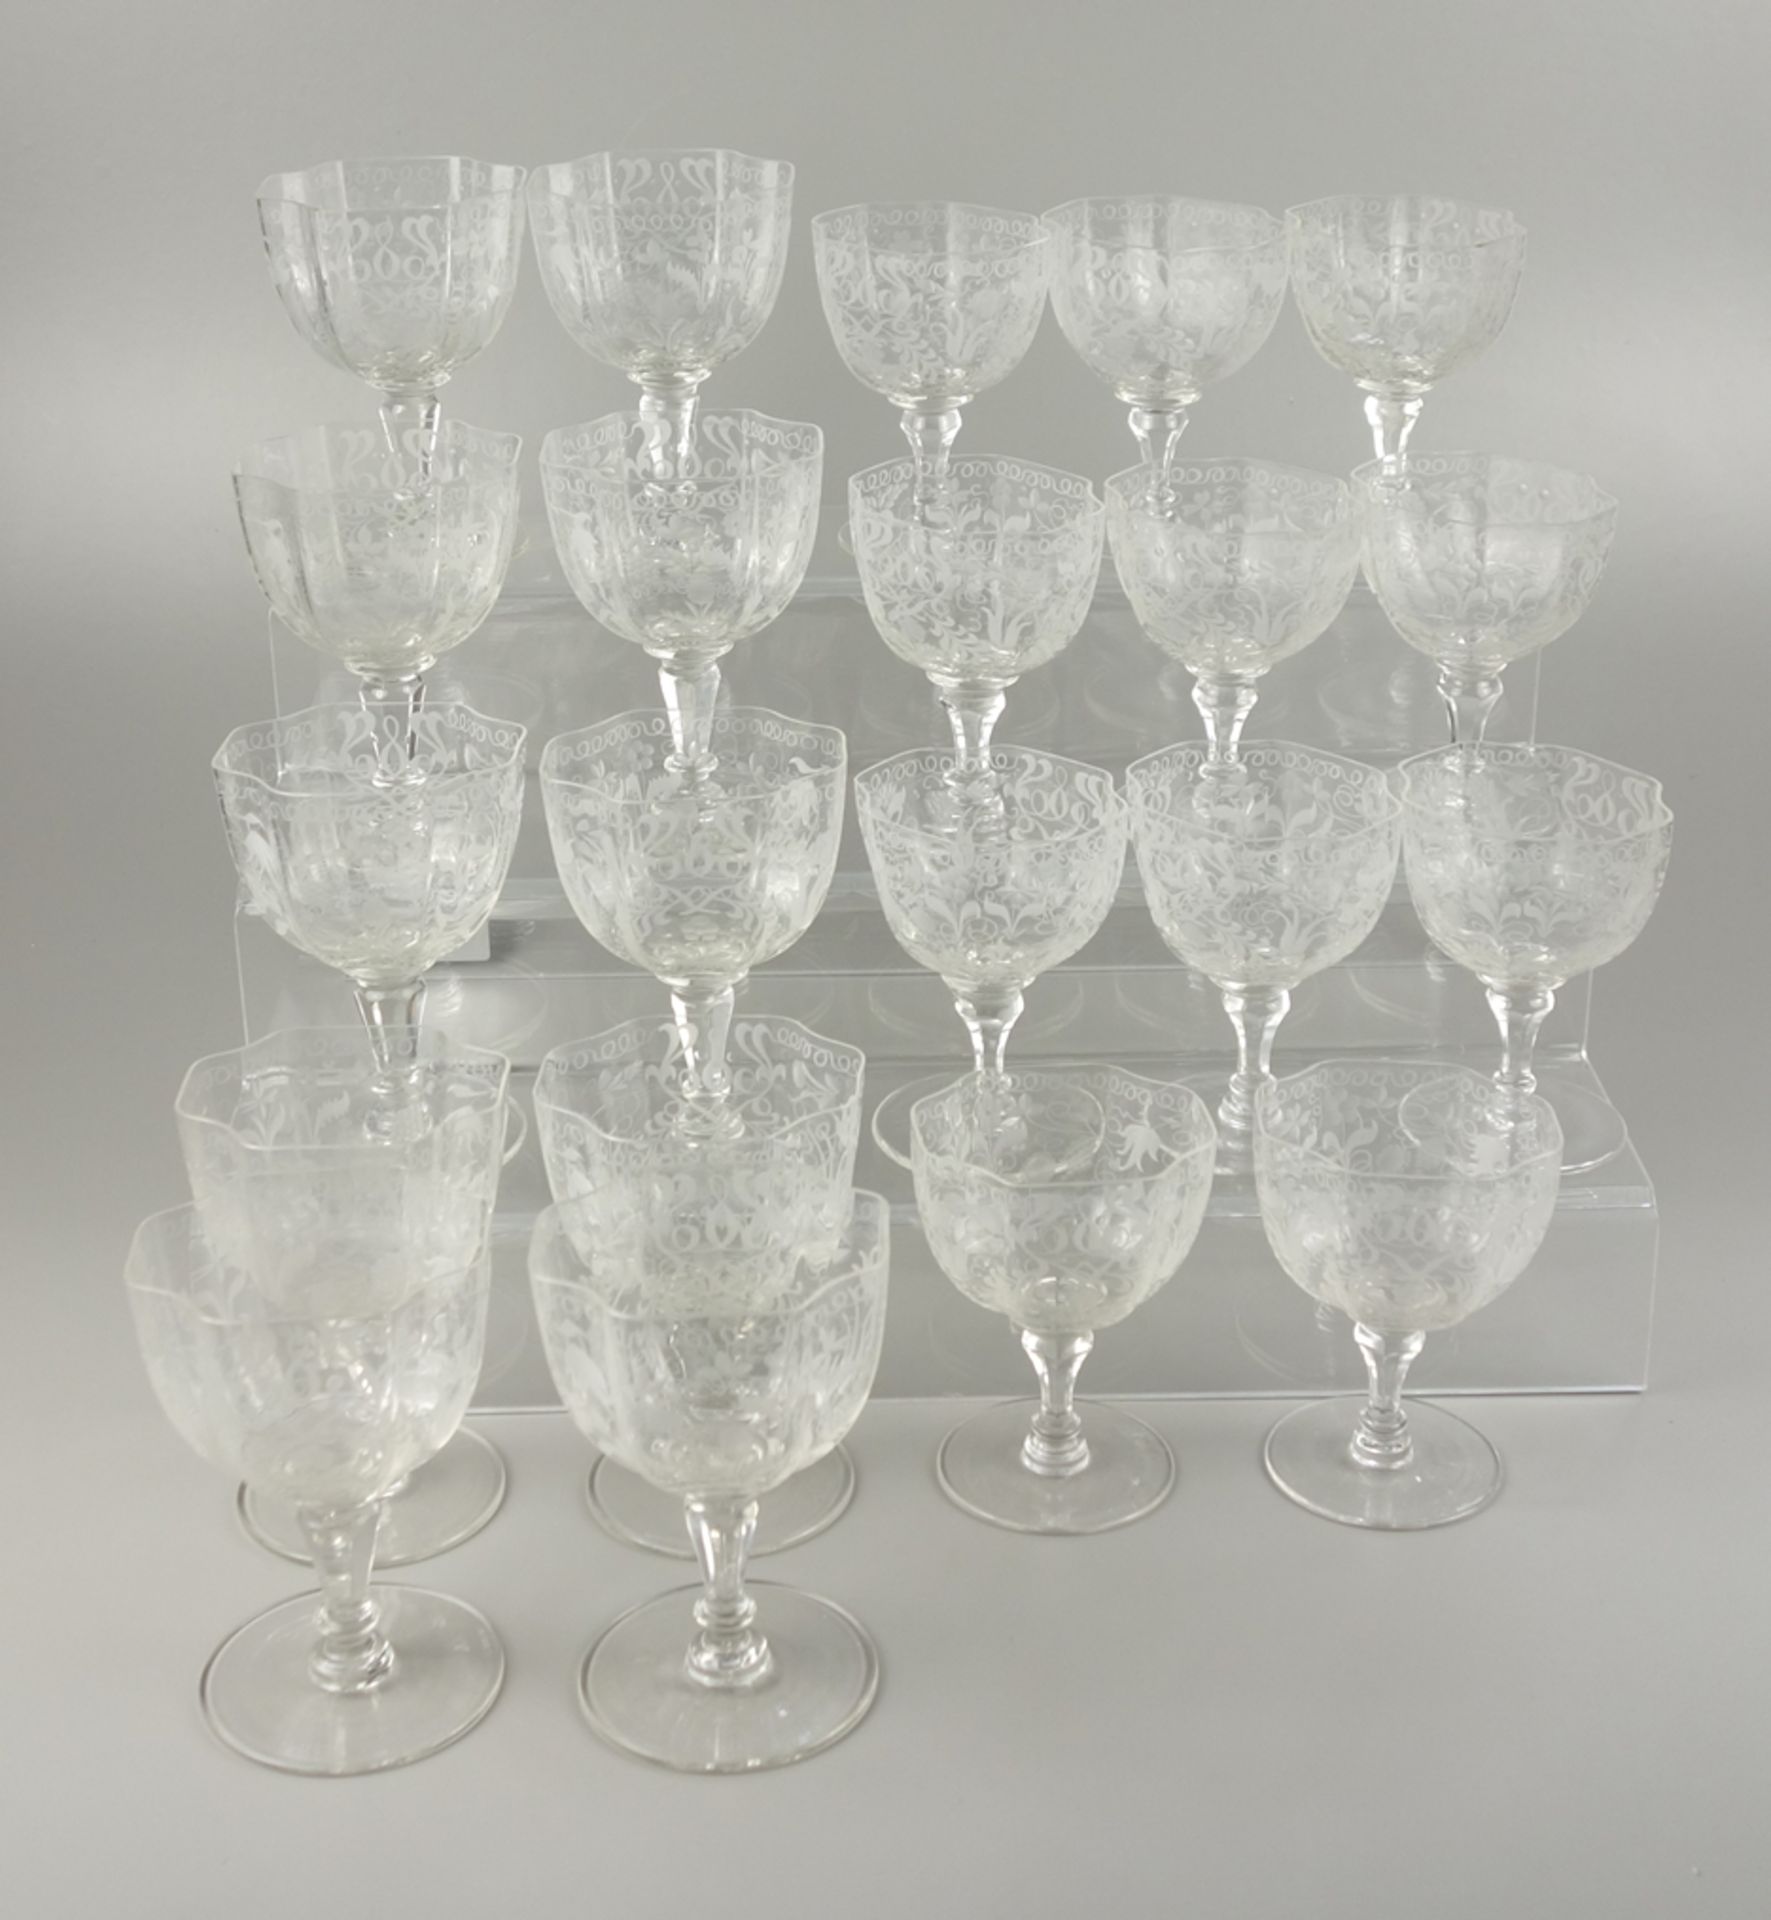 21 high quality wine glasses with delicate floral engraving, 1st half 20th c. - Image 5 of 5